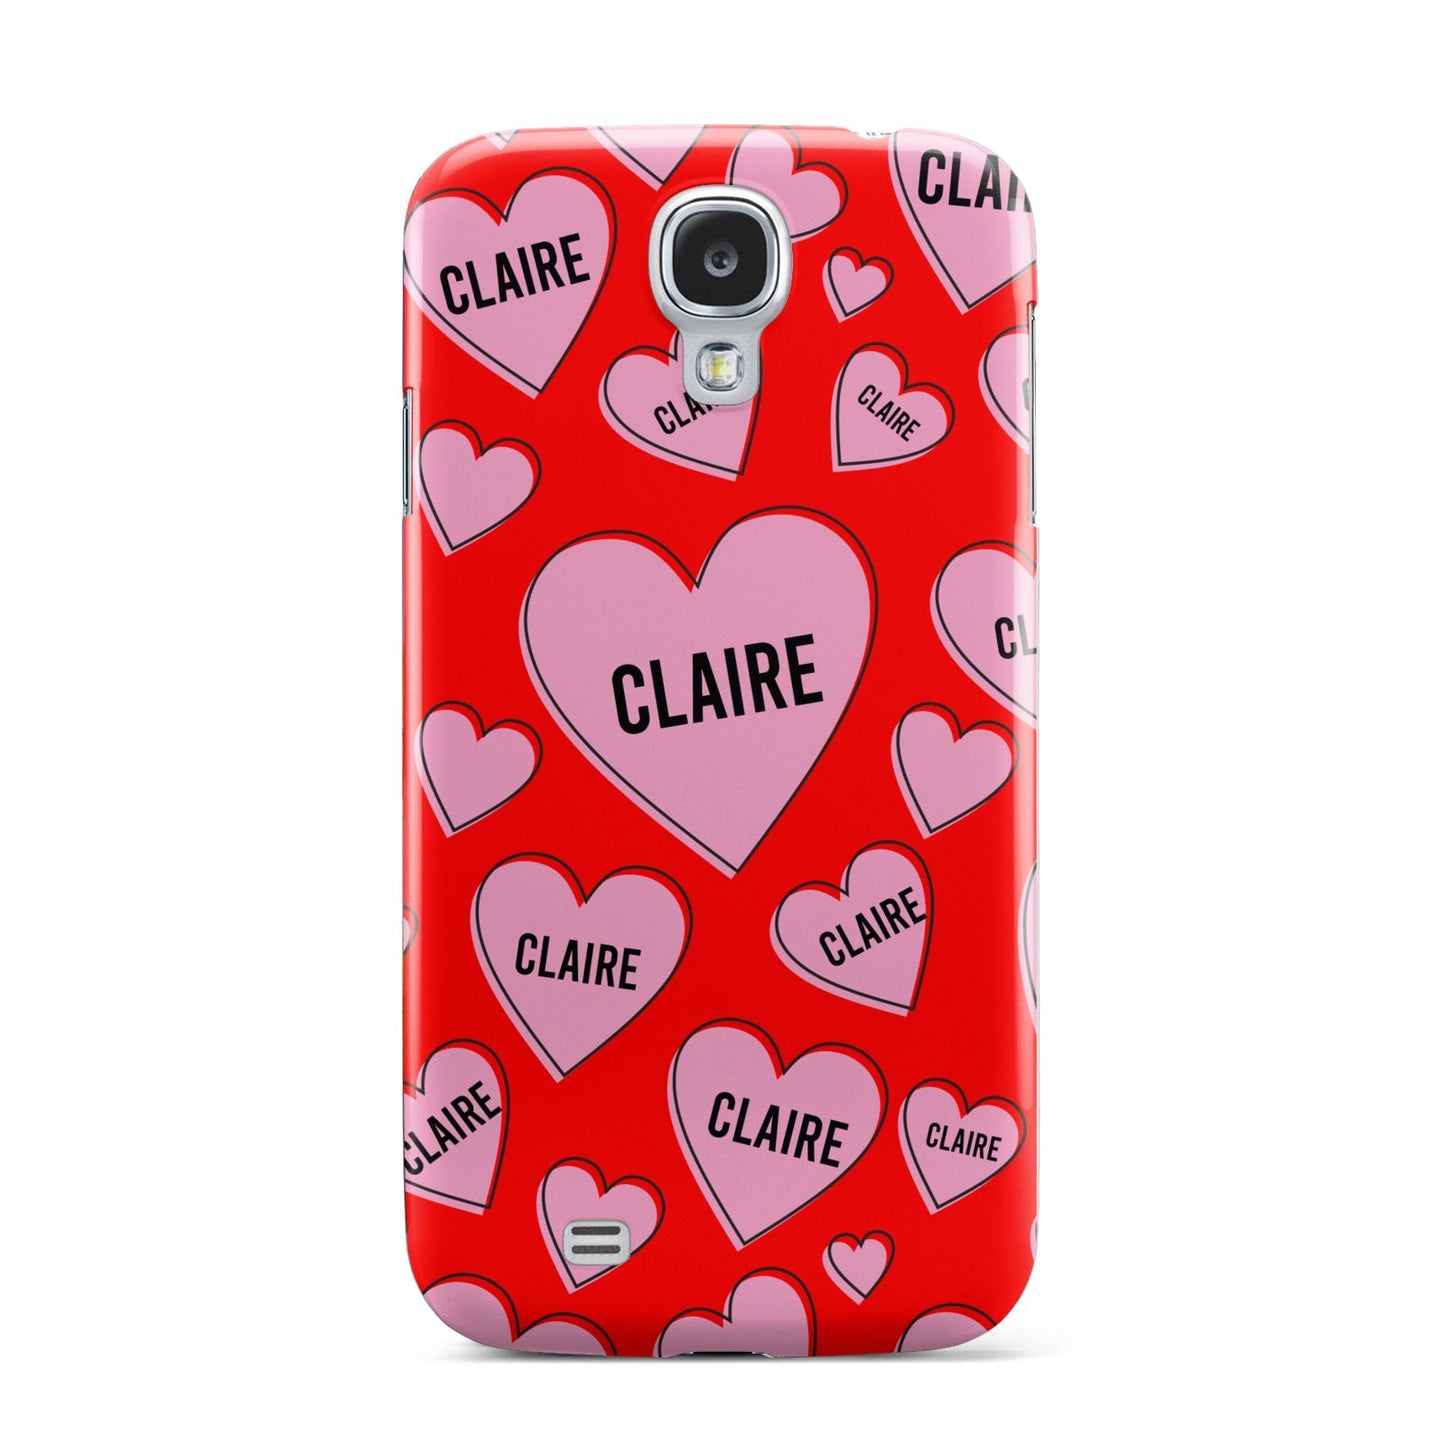 Personalised Hearts Samsung Galaxy S4 Case